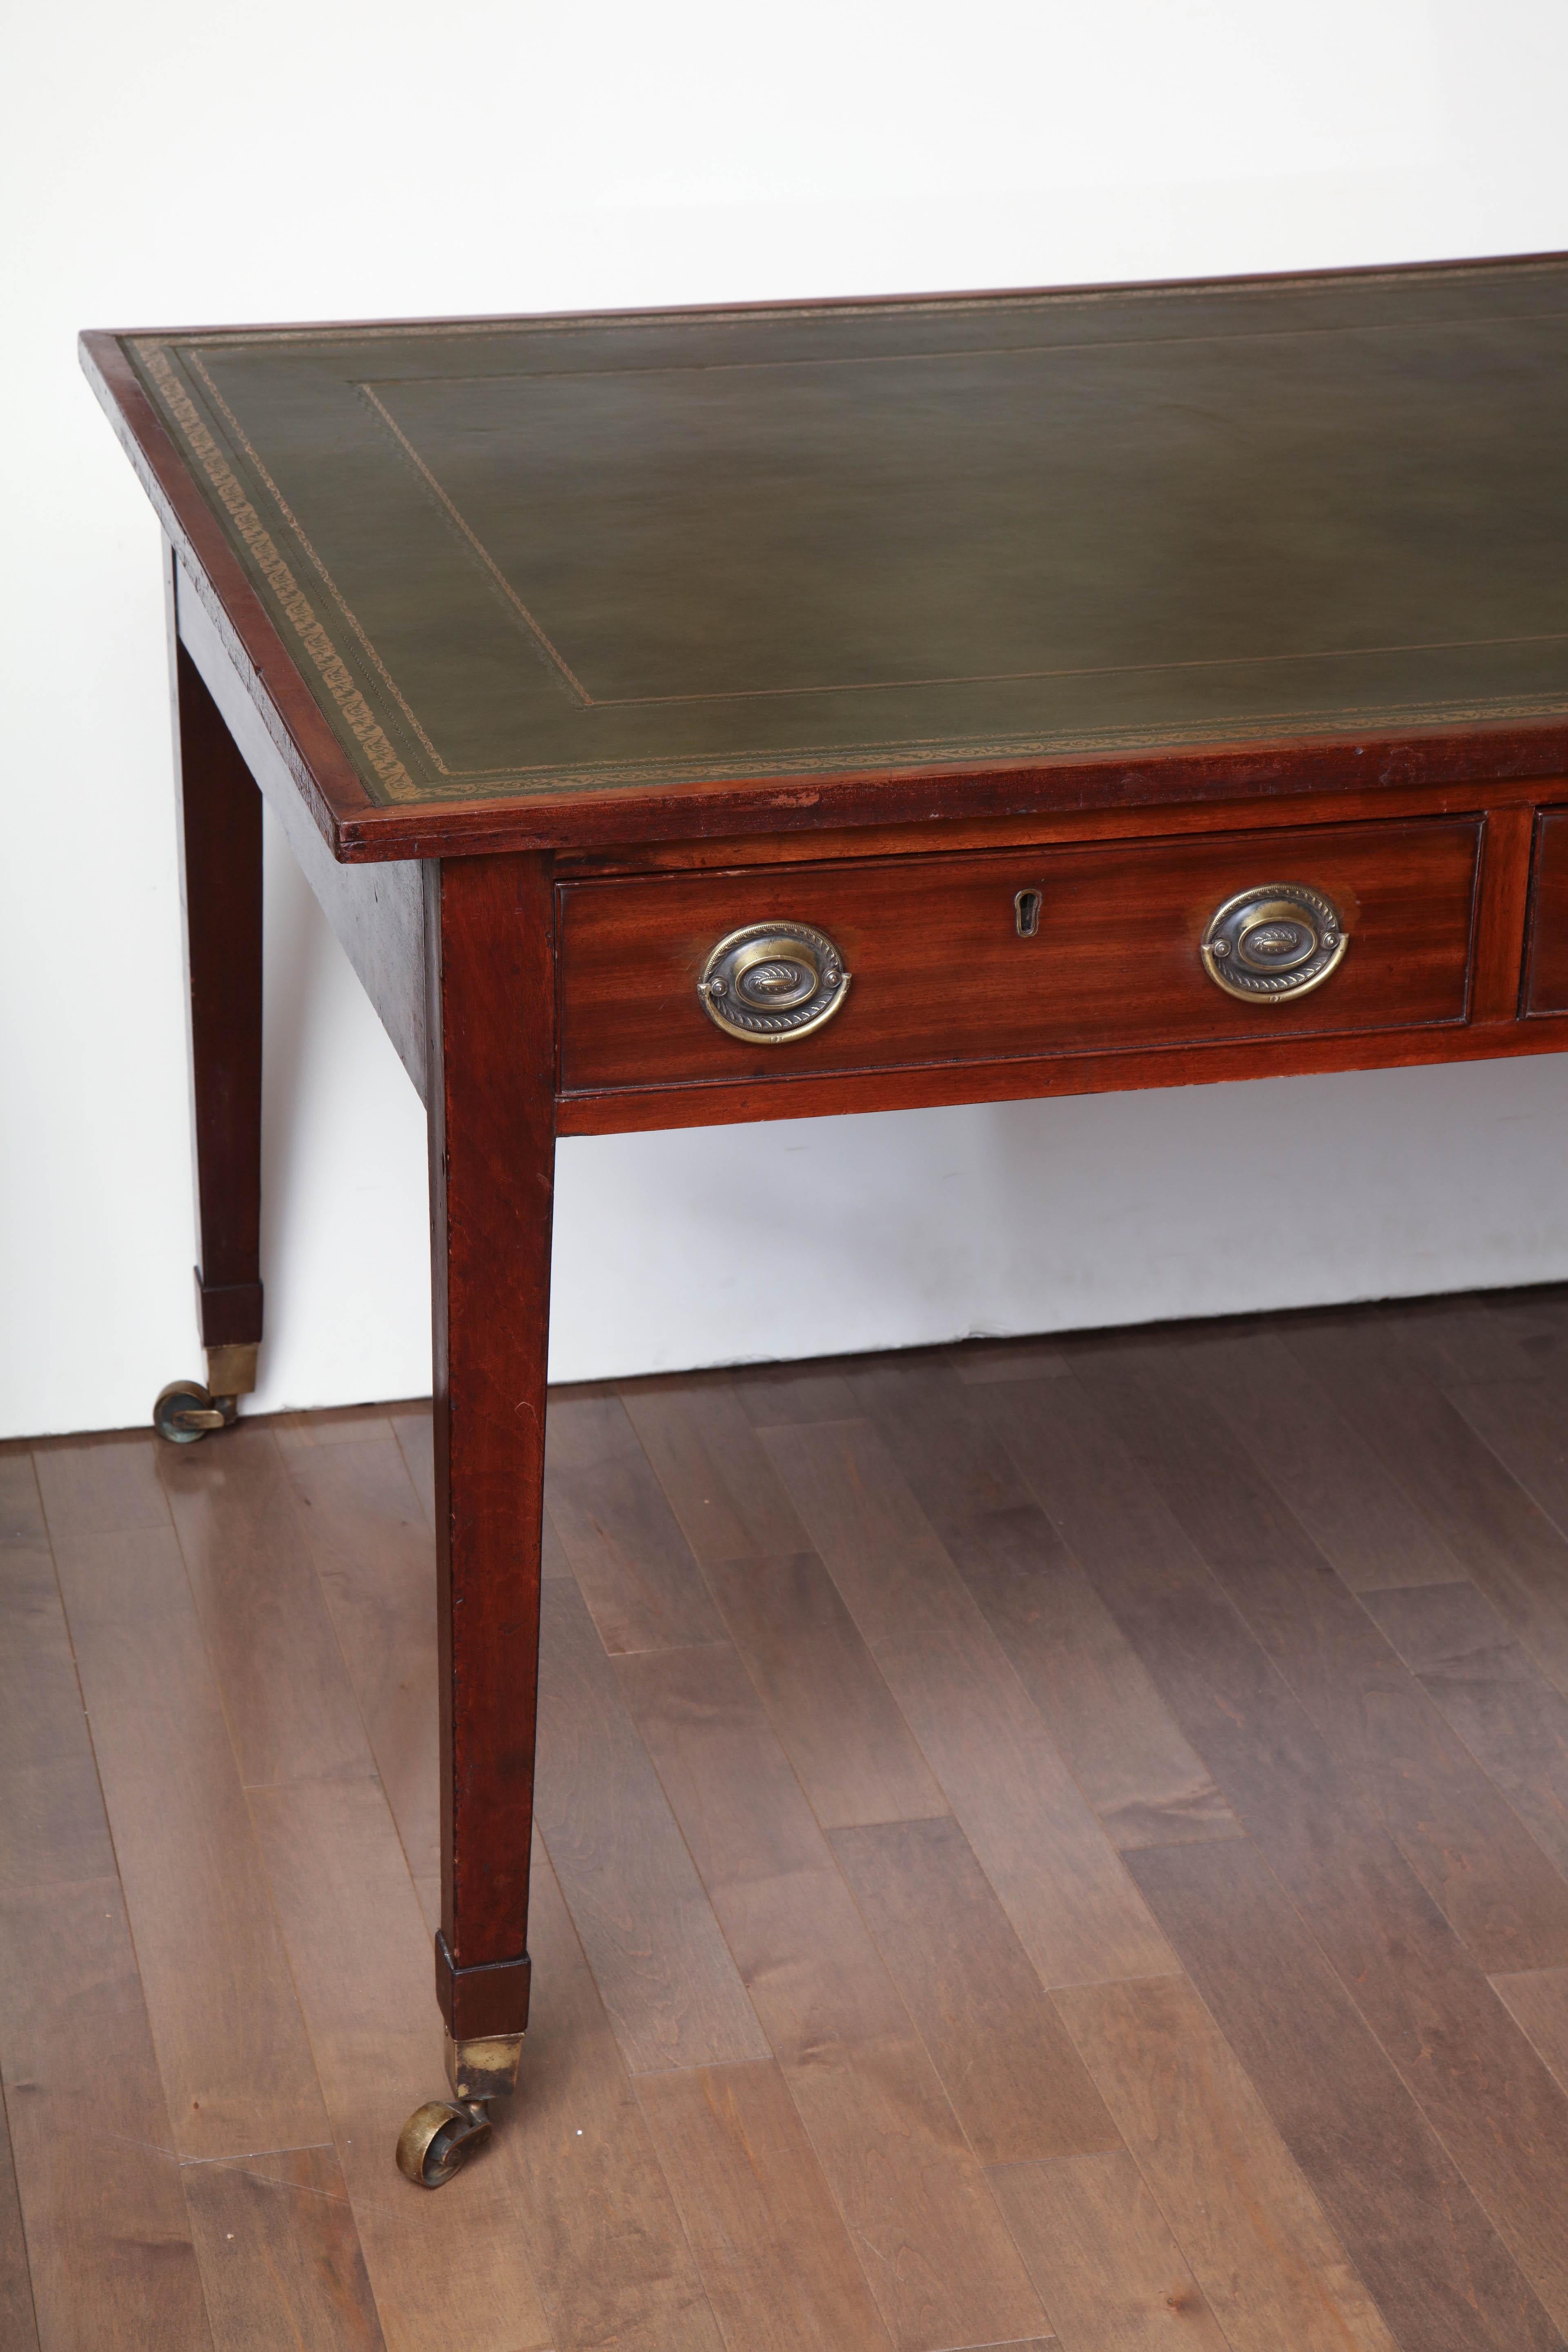 19th century Irish, mahogany and leather topped partners desk with a center drawer fitment.